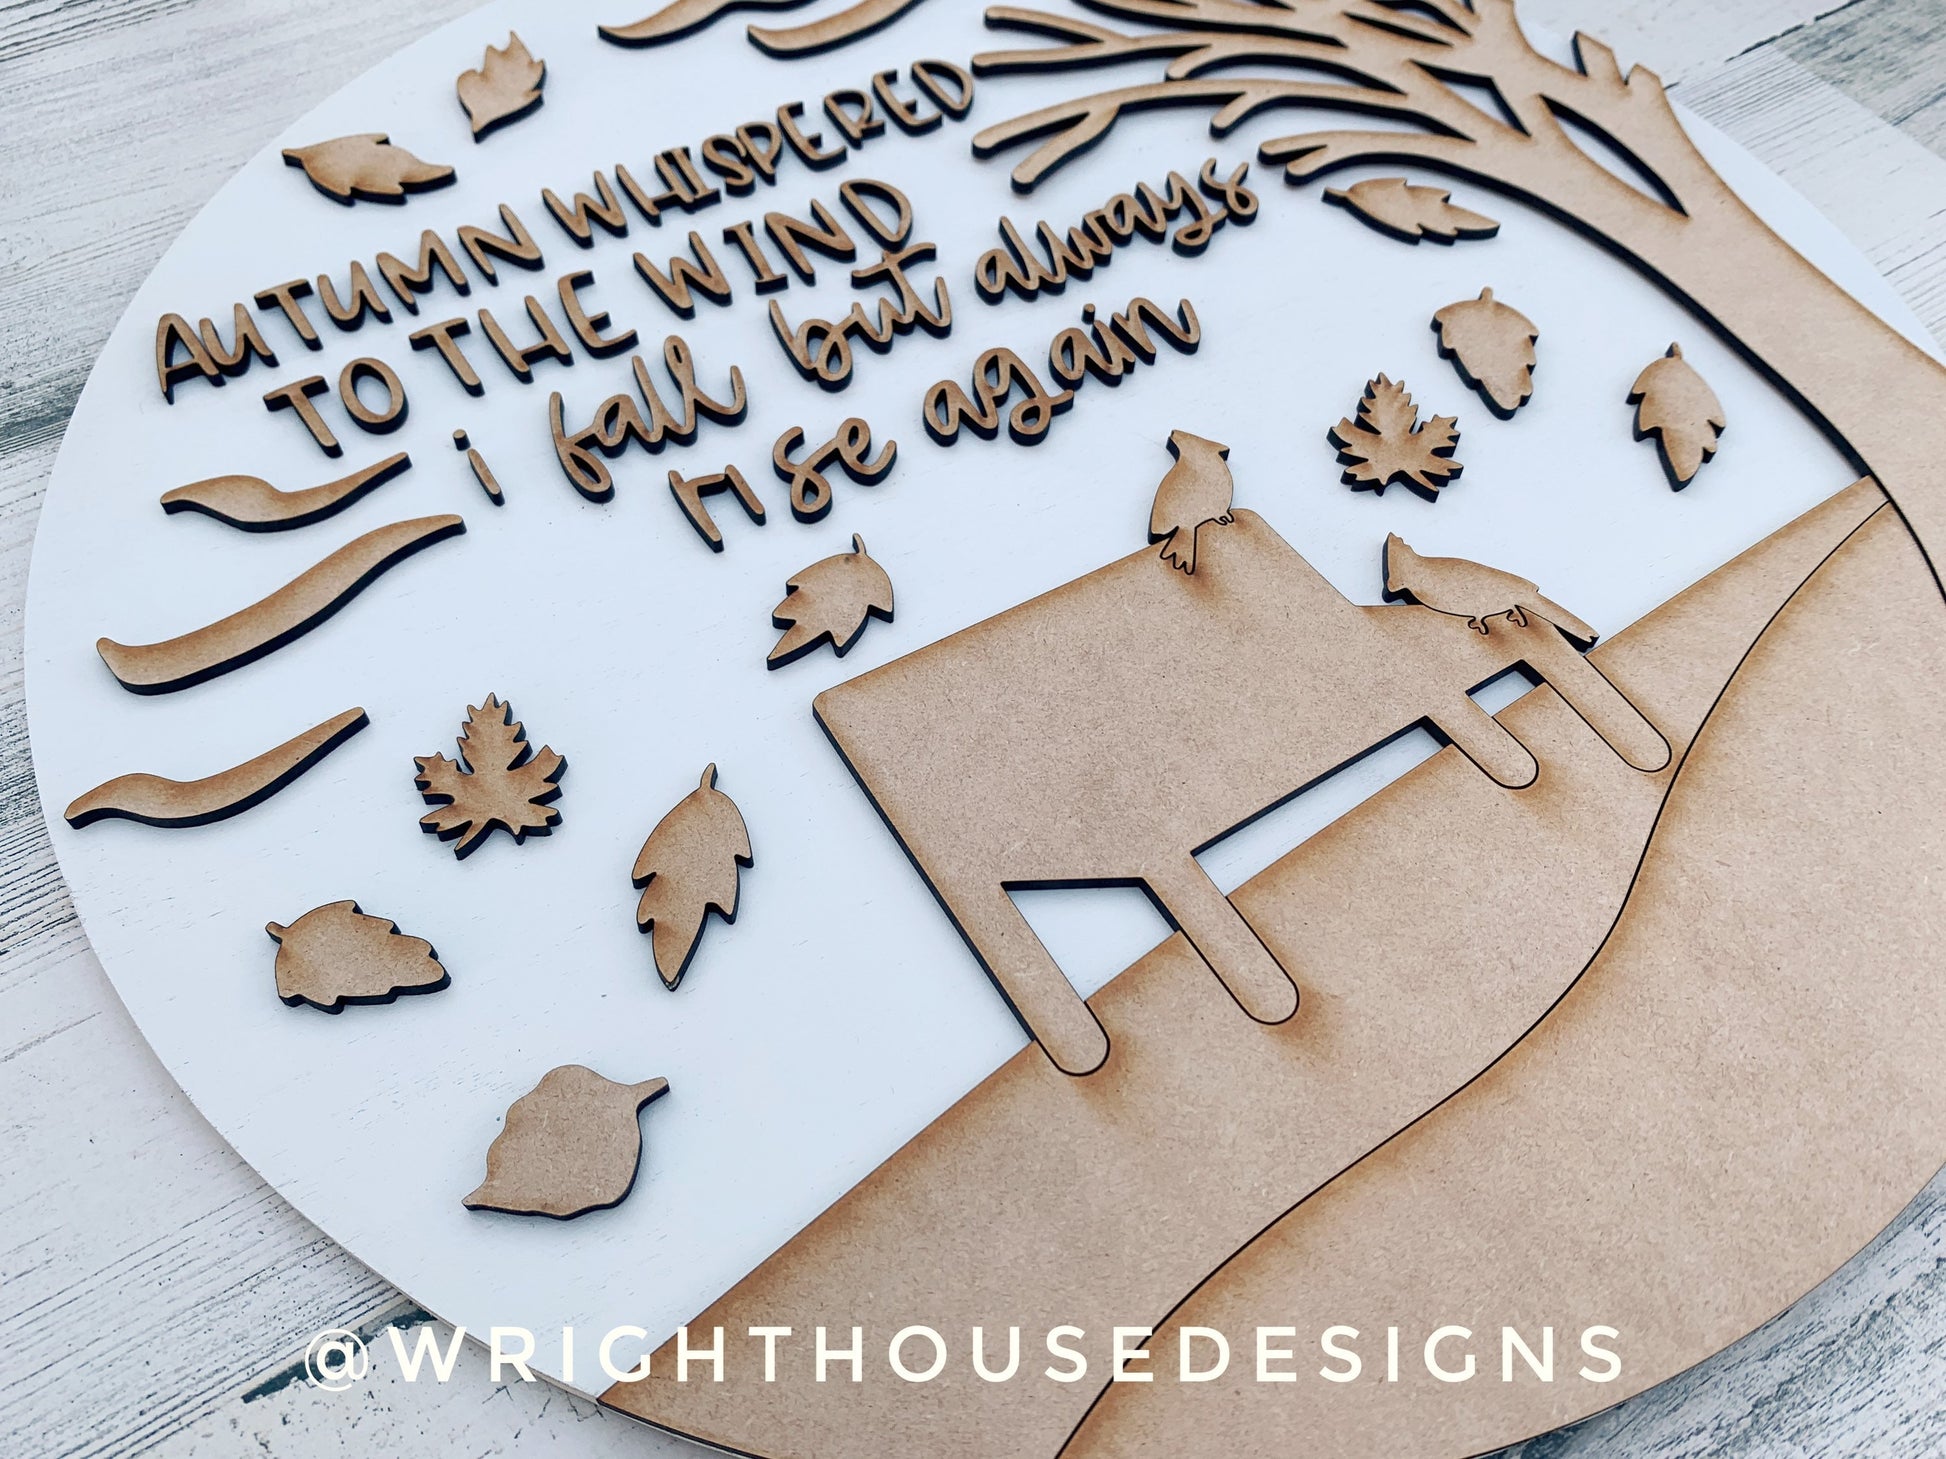 Windy Autumn Day Leaf and Cardinal Door Hanger Round - Seasonal Sign Making and DIY Kits - Cut File For Glowforge Laser - Digital SVG File